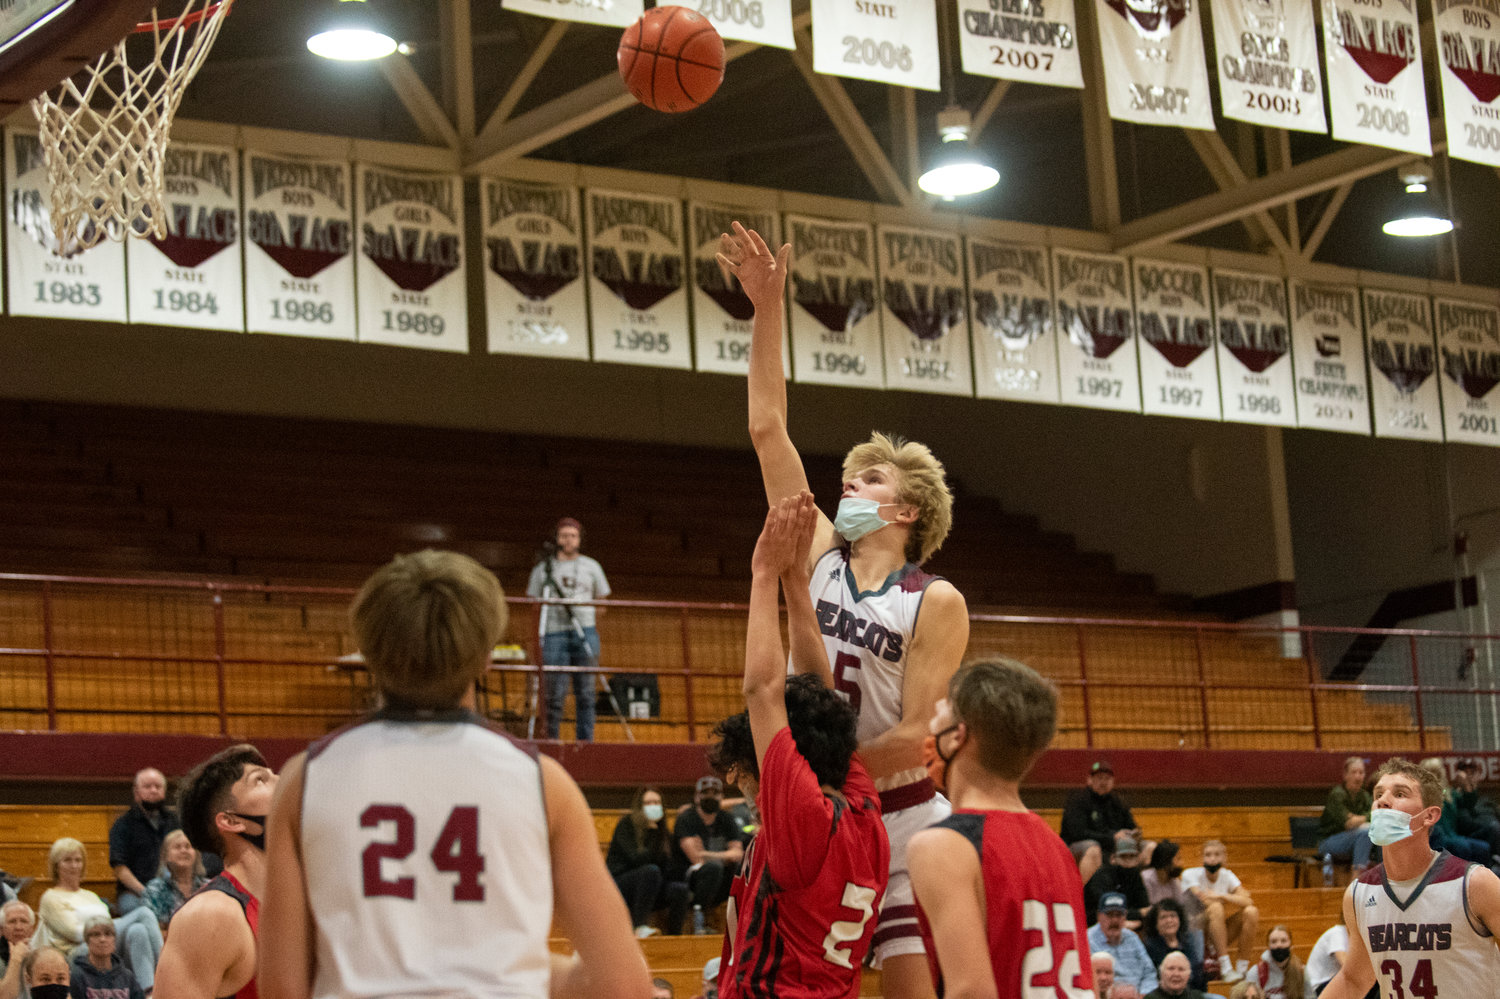 W.F. West junior Dirk Plakinger (5) throws up a floater over Shelton's defense in the district quarterfinals on Tuesday at home.